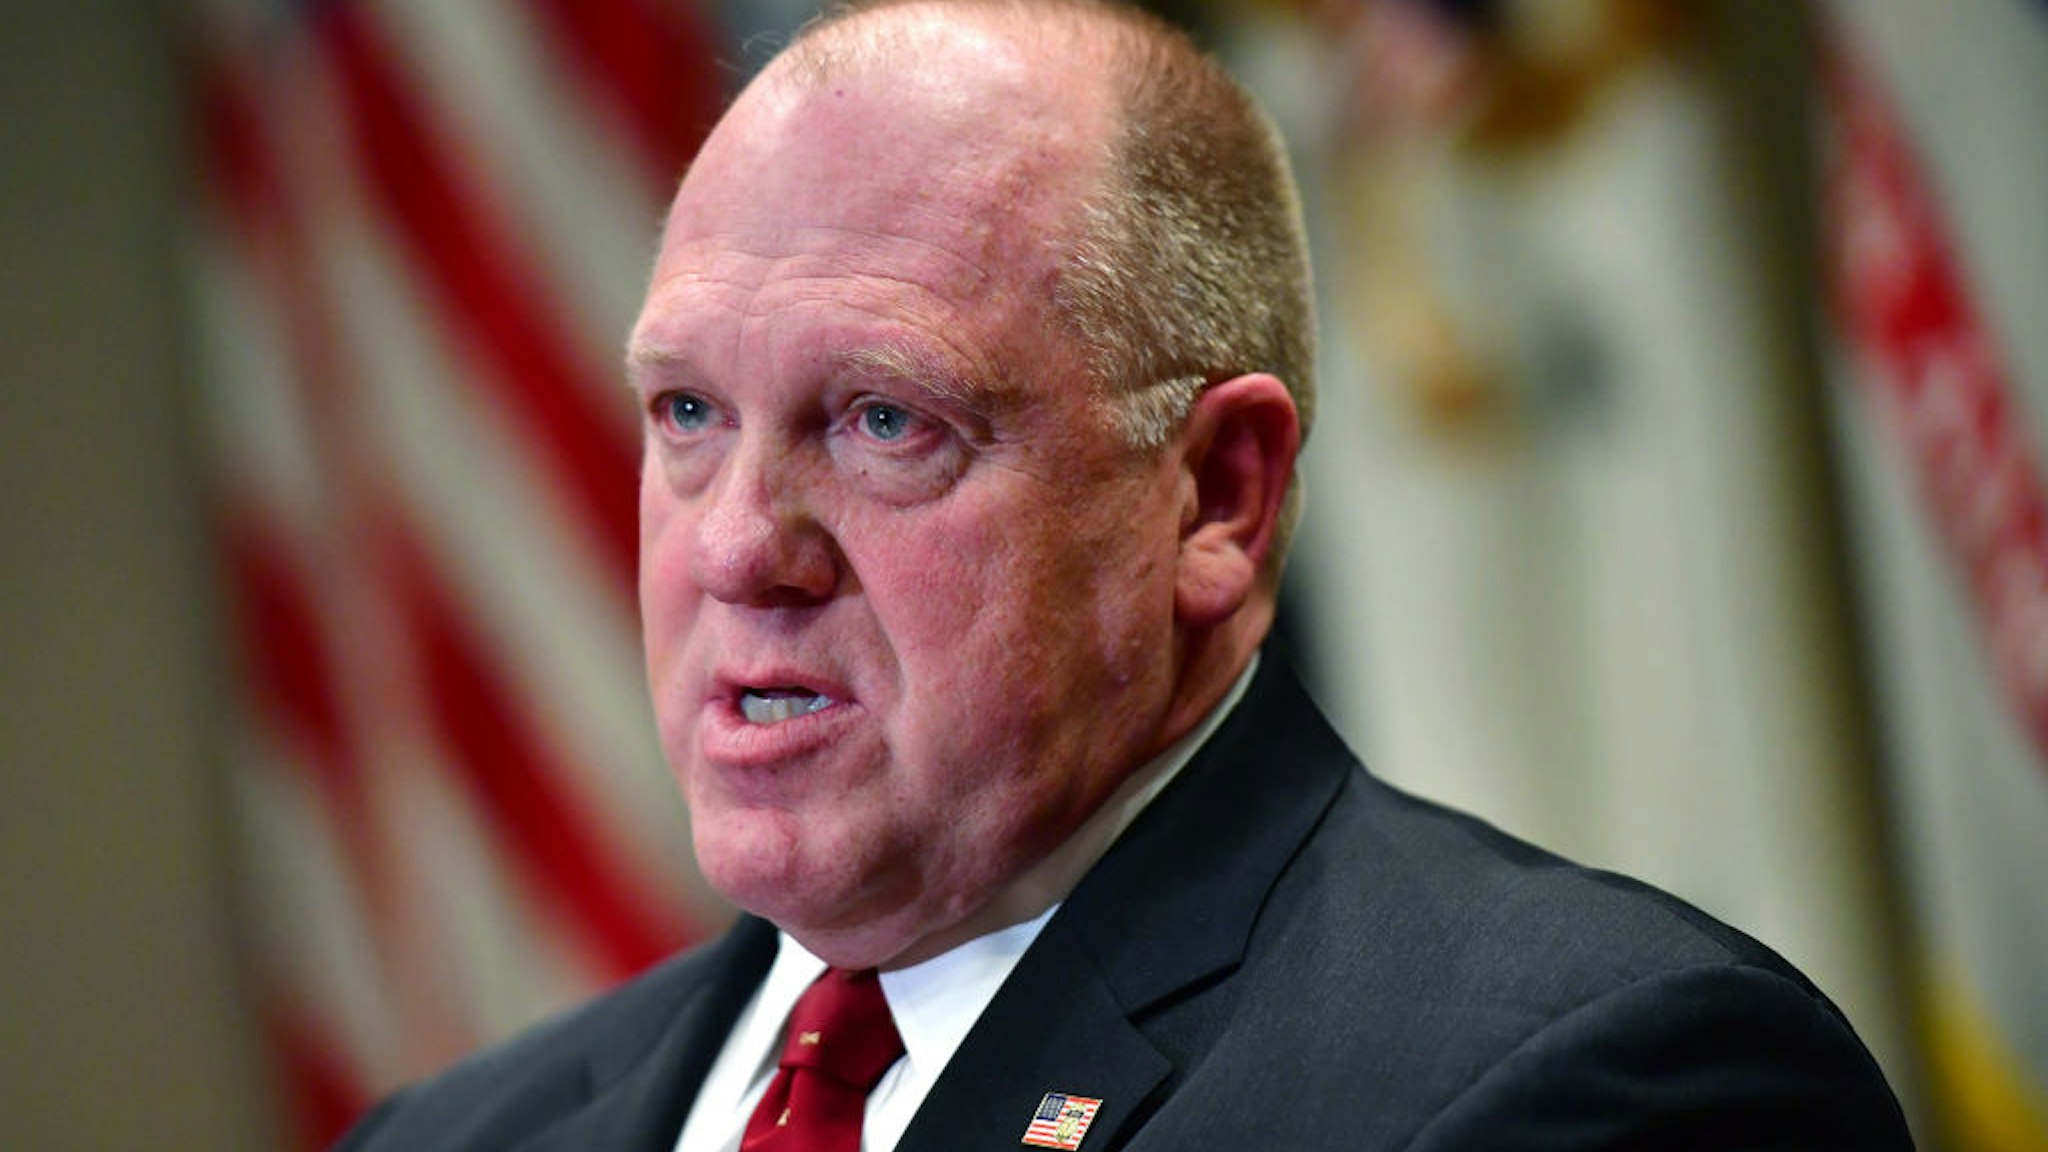 Tom Homan, acting director of Immigration and Customs Enforcement (ICE), speaks during a law enforcement roundtable on sanctuary cities